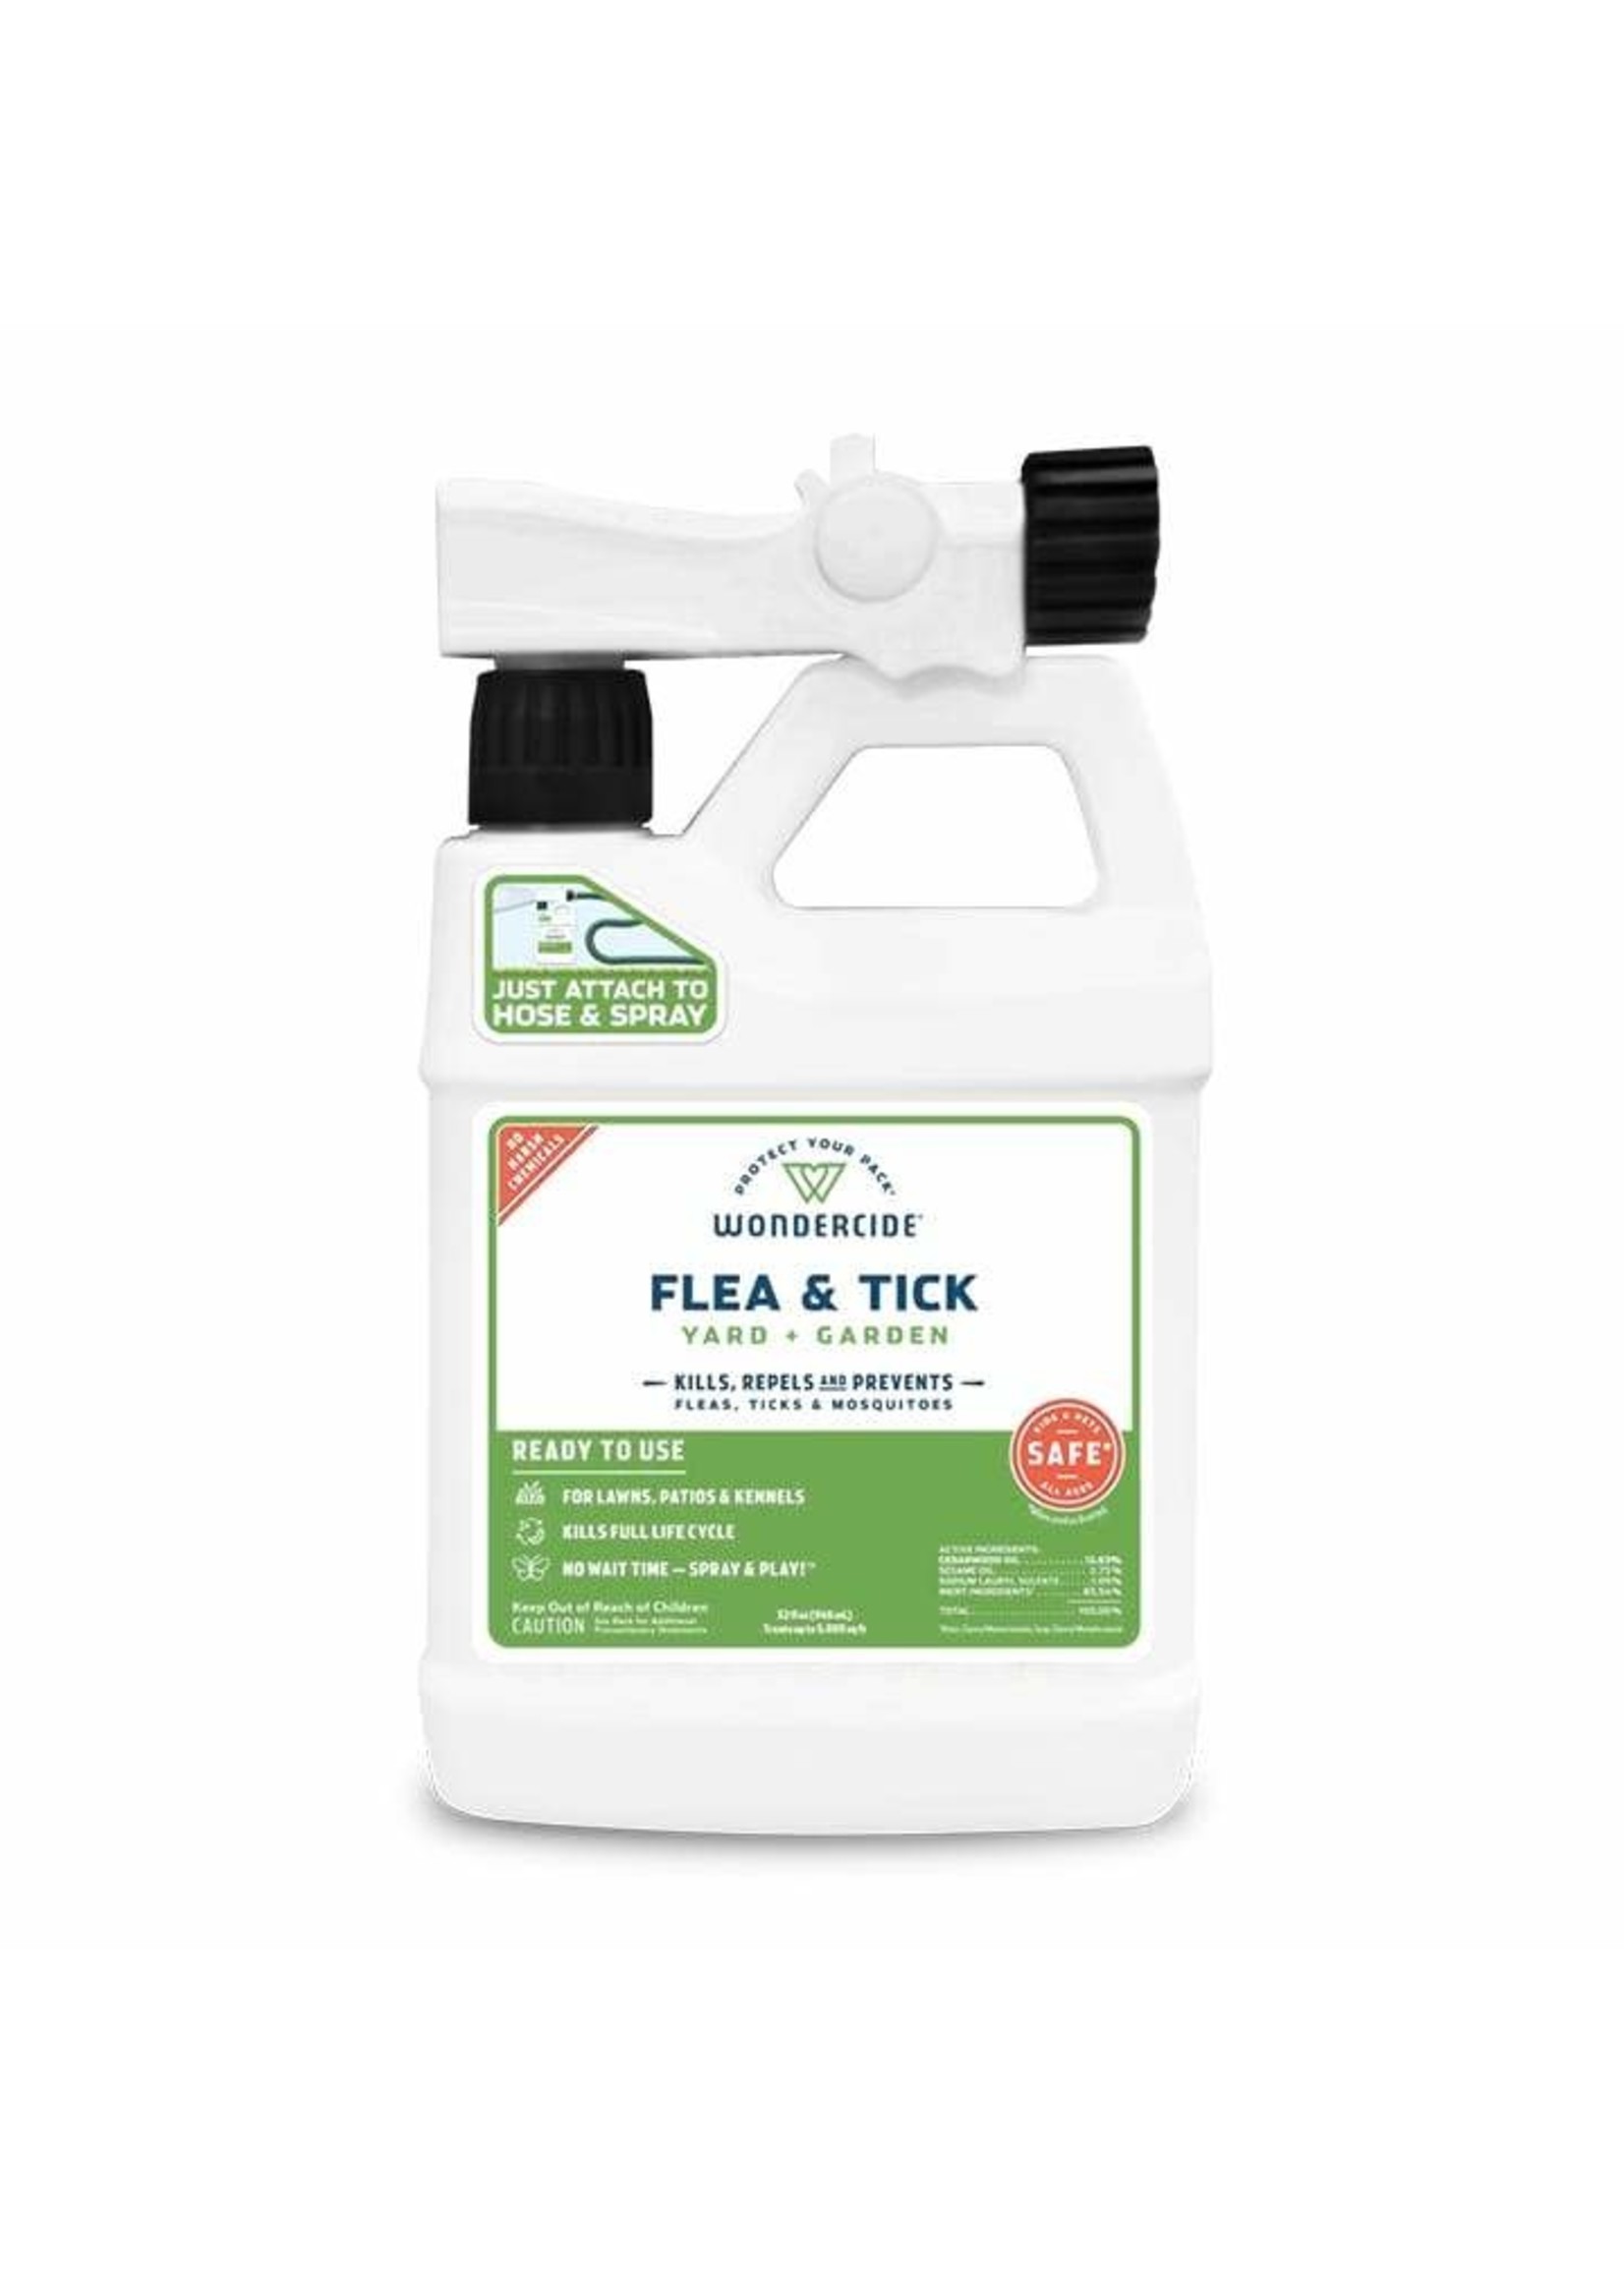 Wondercide Ready-to-Use Flea & Tick Spray for Yard + Garden with Natural Essential Oils 32 oz